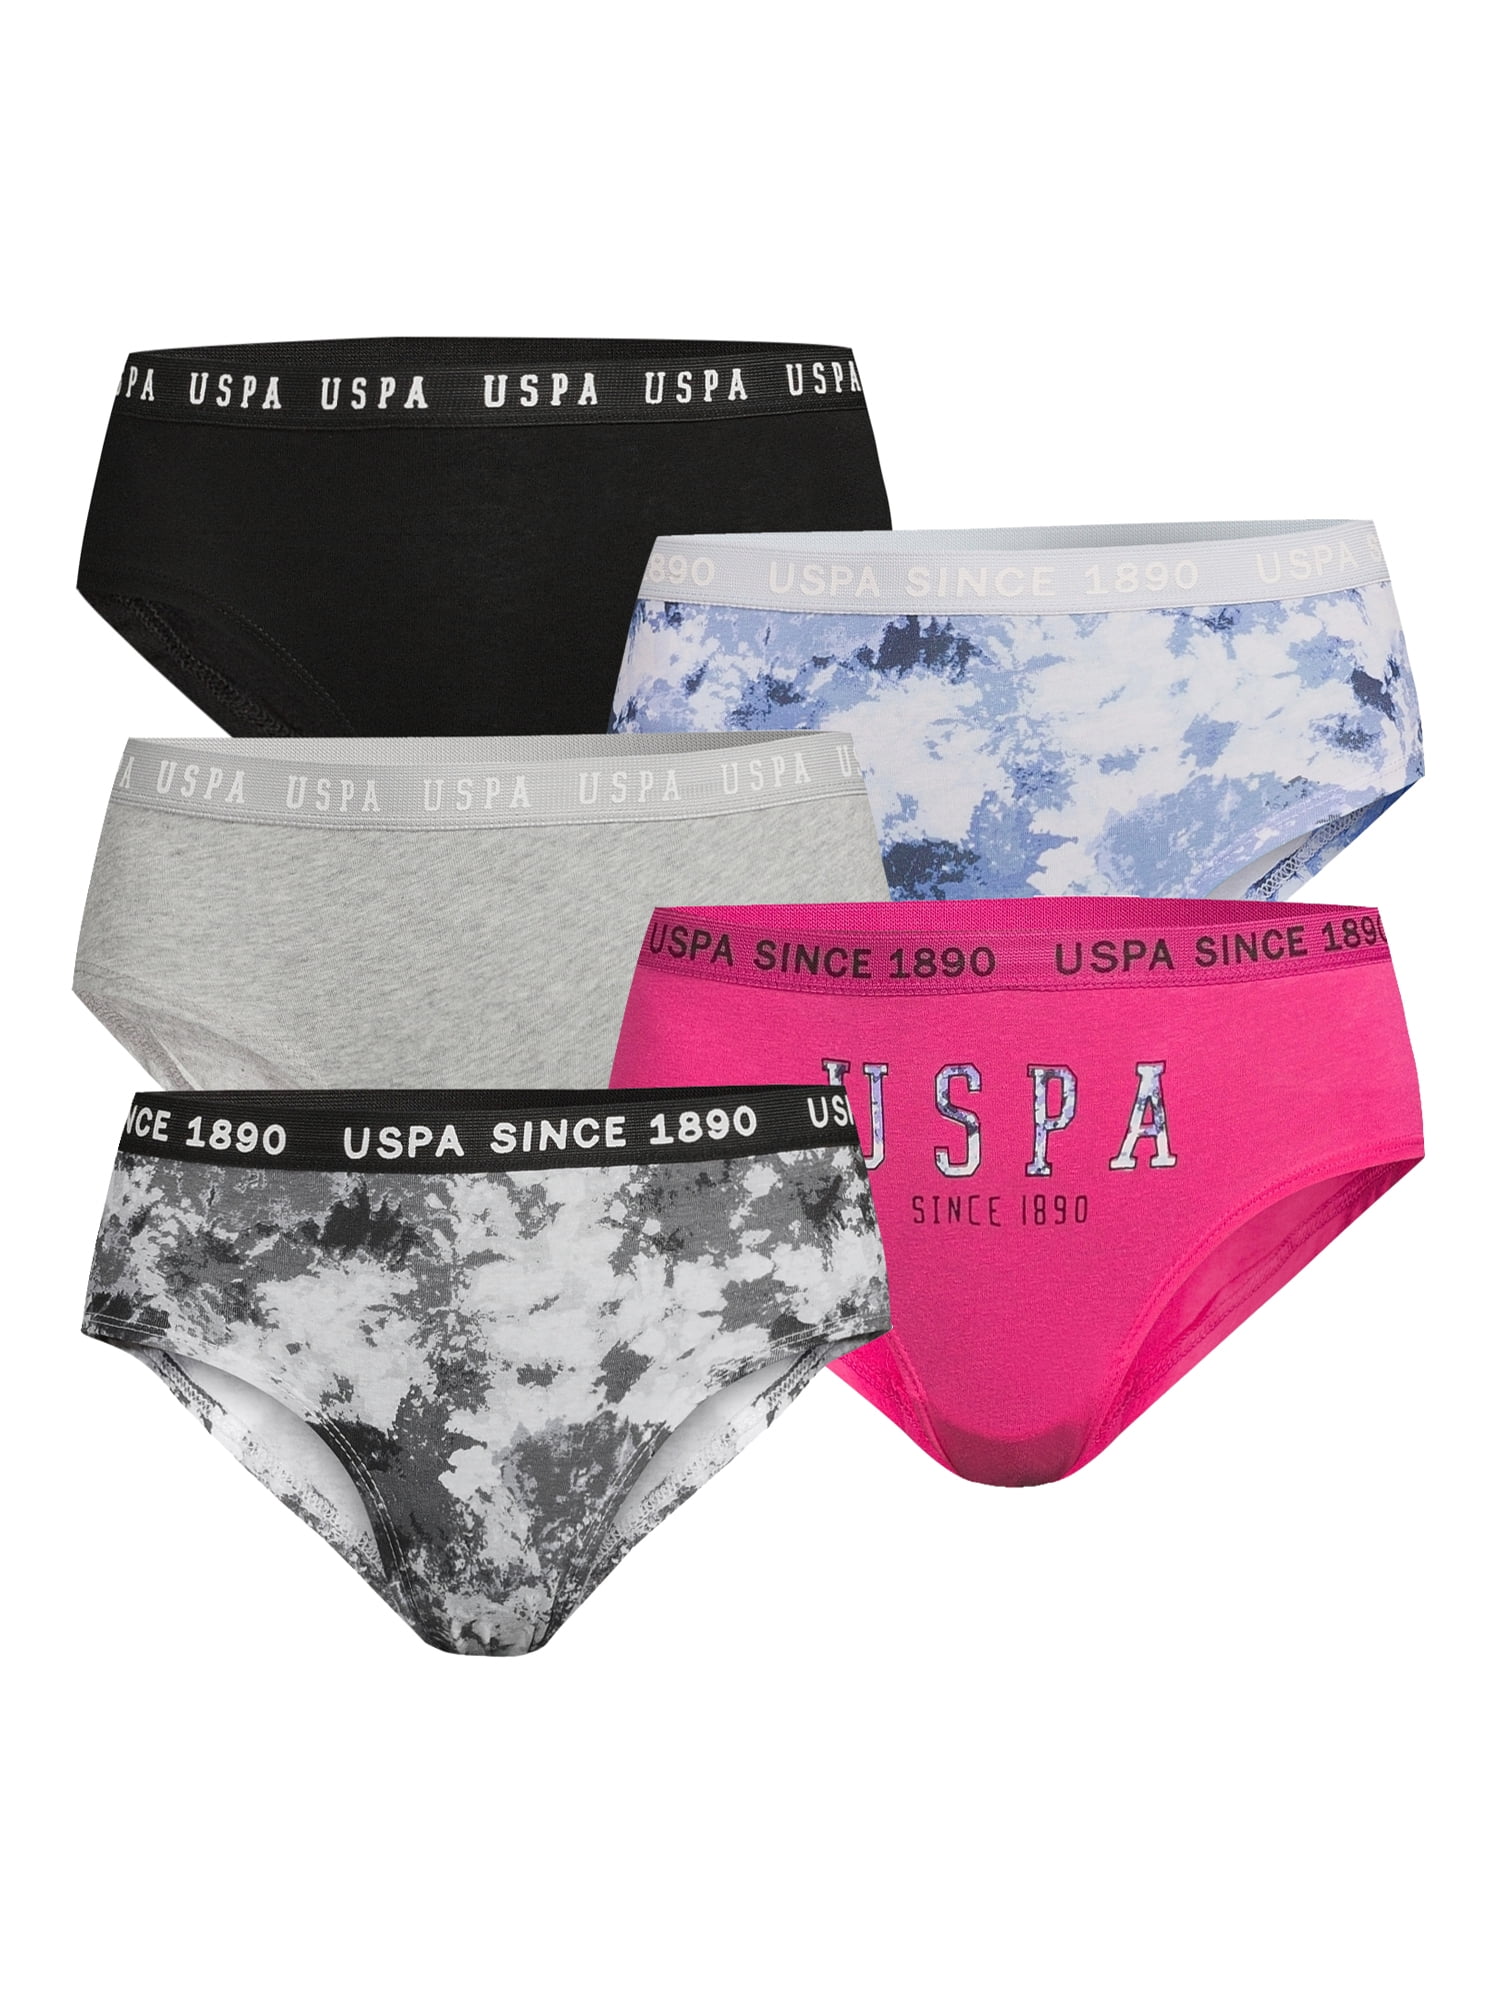 U.S. Polo Assn. Women's and Women's Plus Size Hipster Panties, 5 Pack 